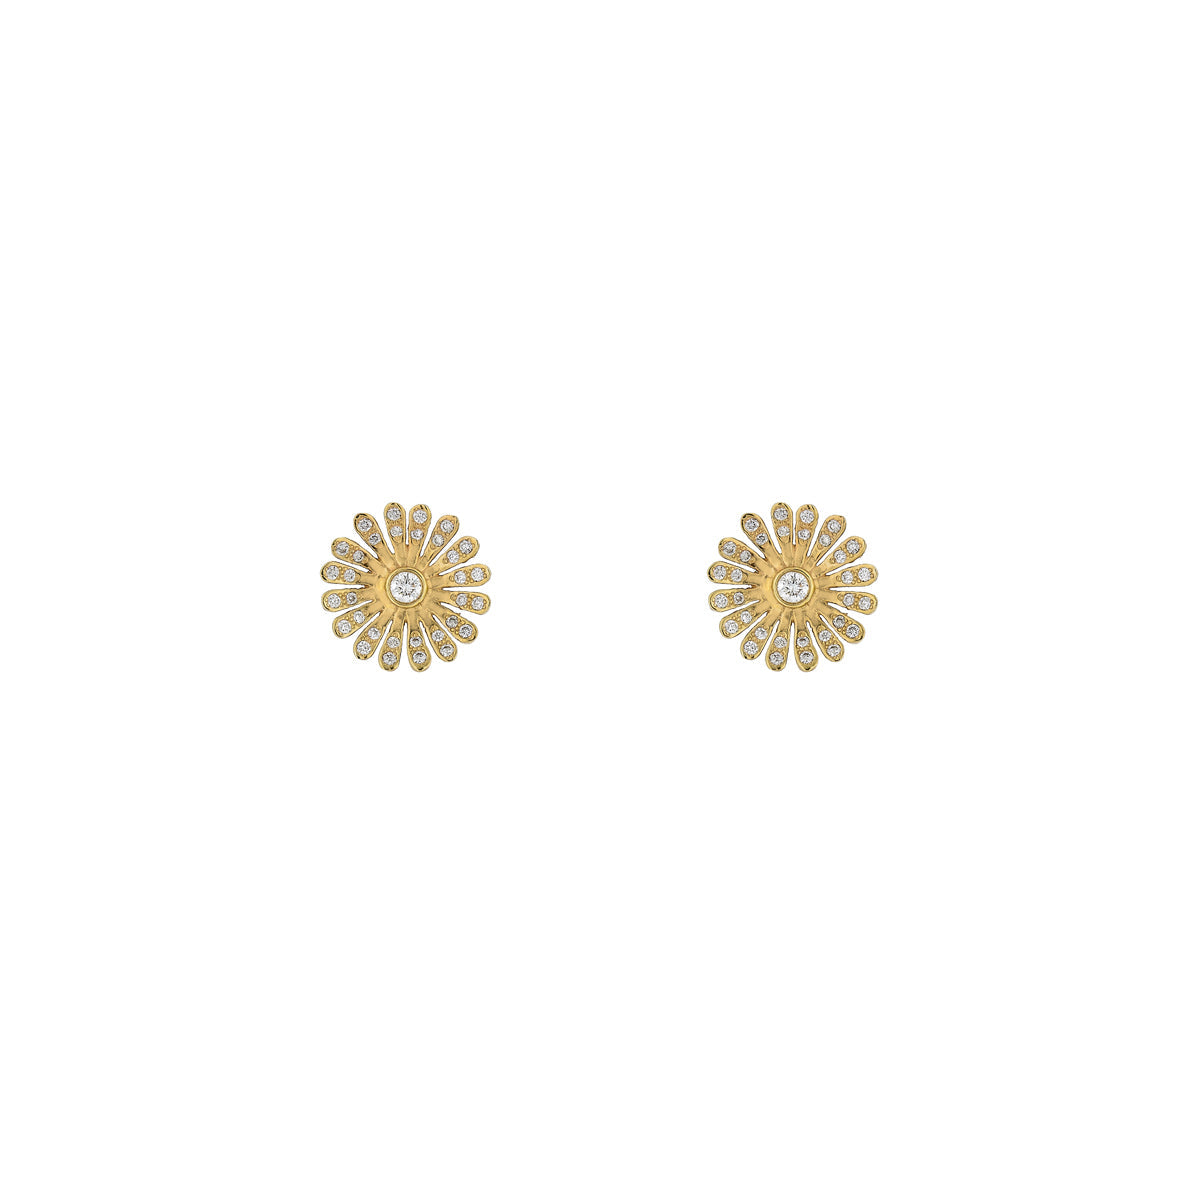 A pair of our Gold and Diamond Daisy Stud Earrings